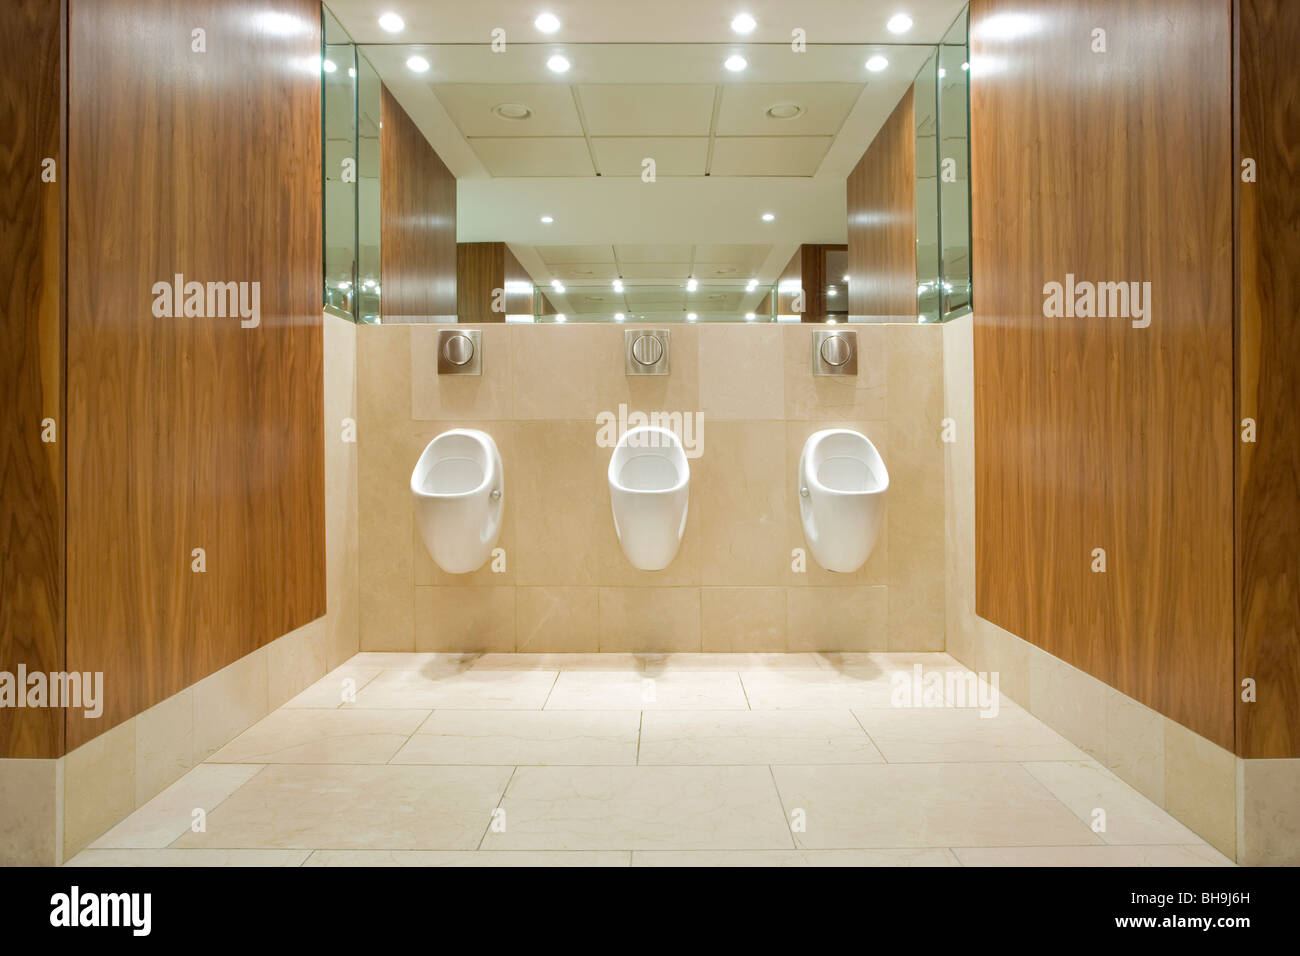 Urinal,urinals,toilet,ablutions,loo,hotel,clean,urinate,gents Stock Photo